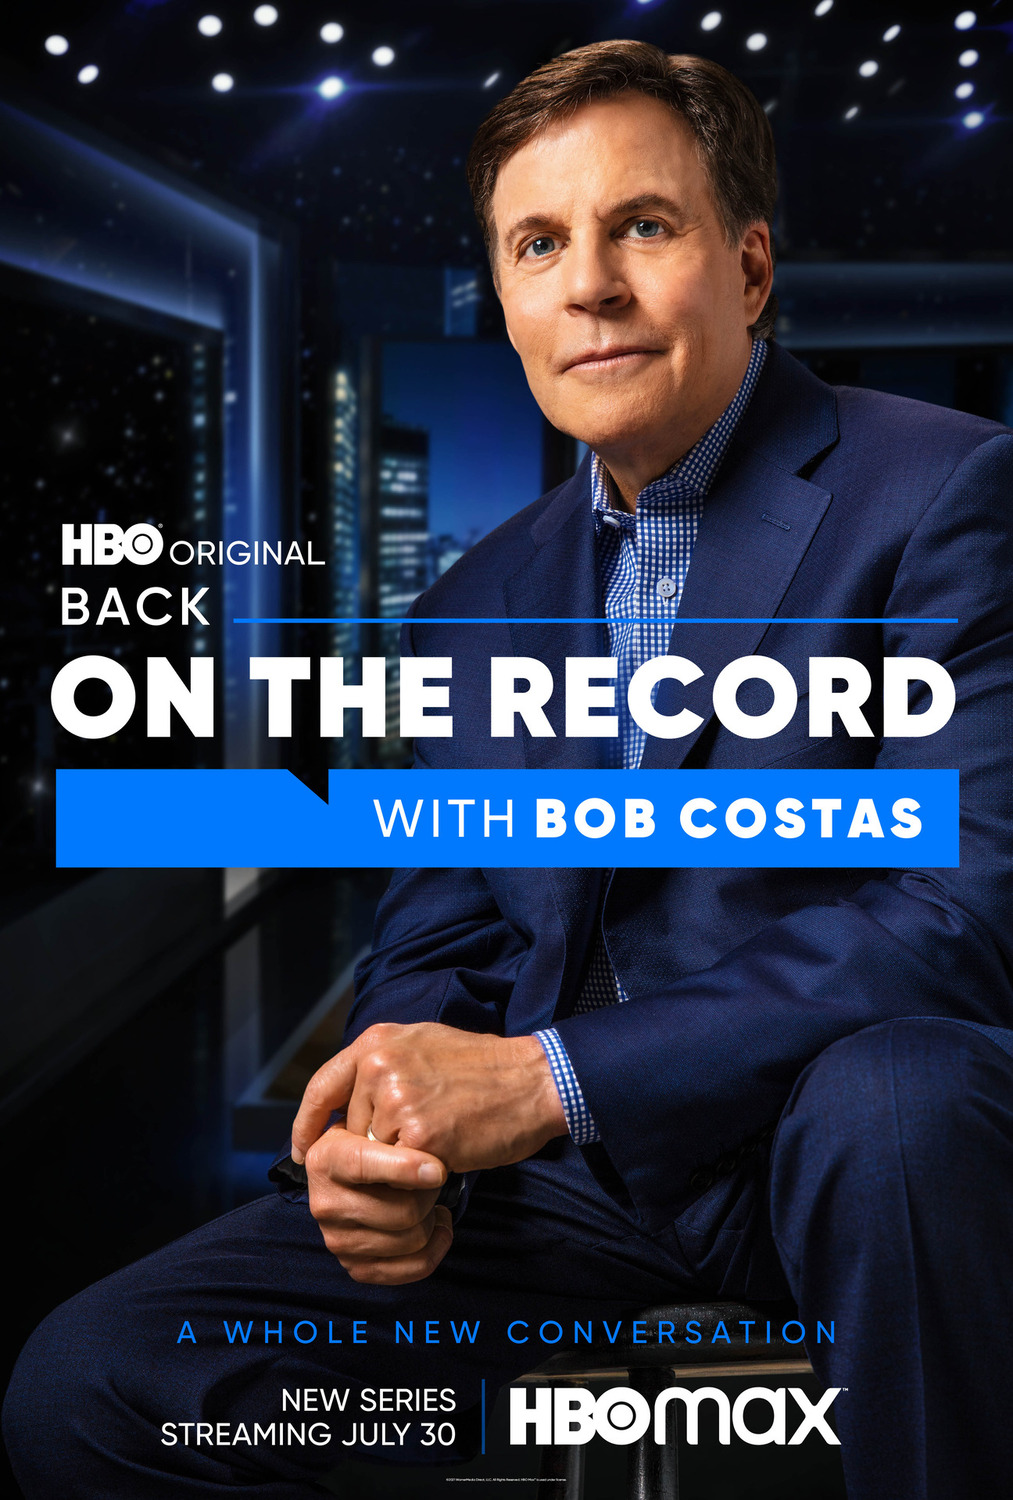 Extra Large TV Poster Image for Back on the Record with Bob Costas 